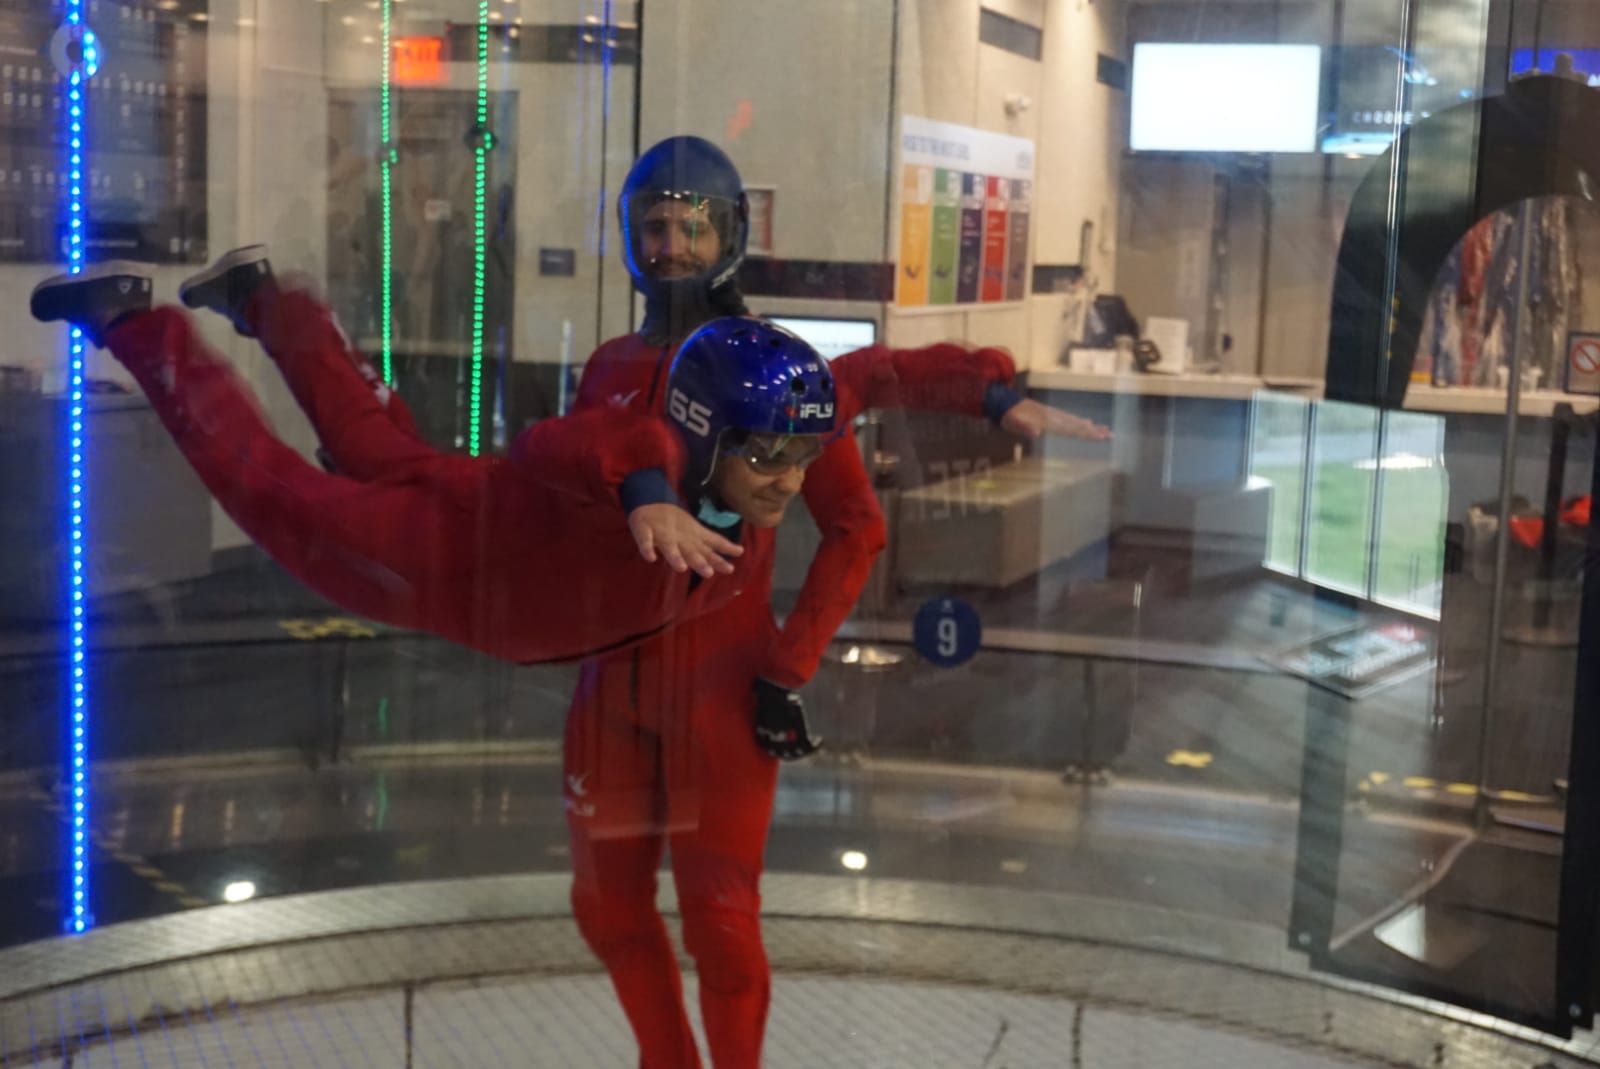 Girl mid flight at iFly Indoor Skydiving.